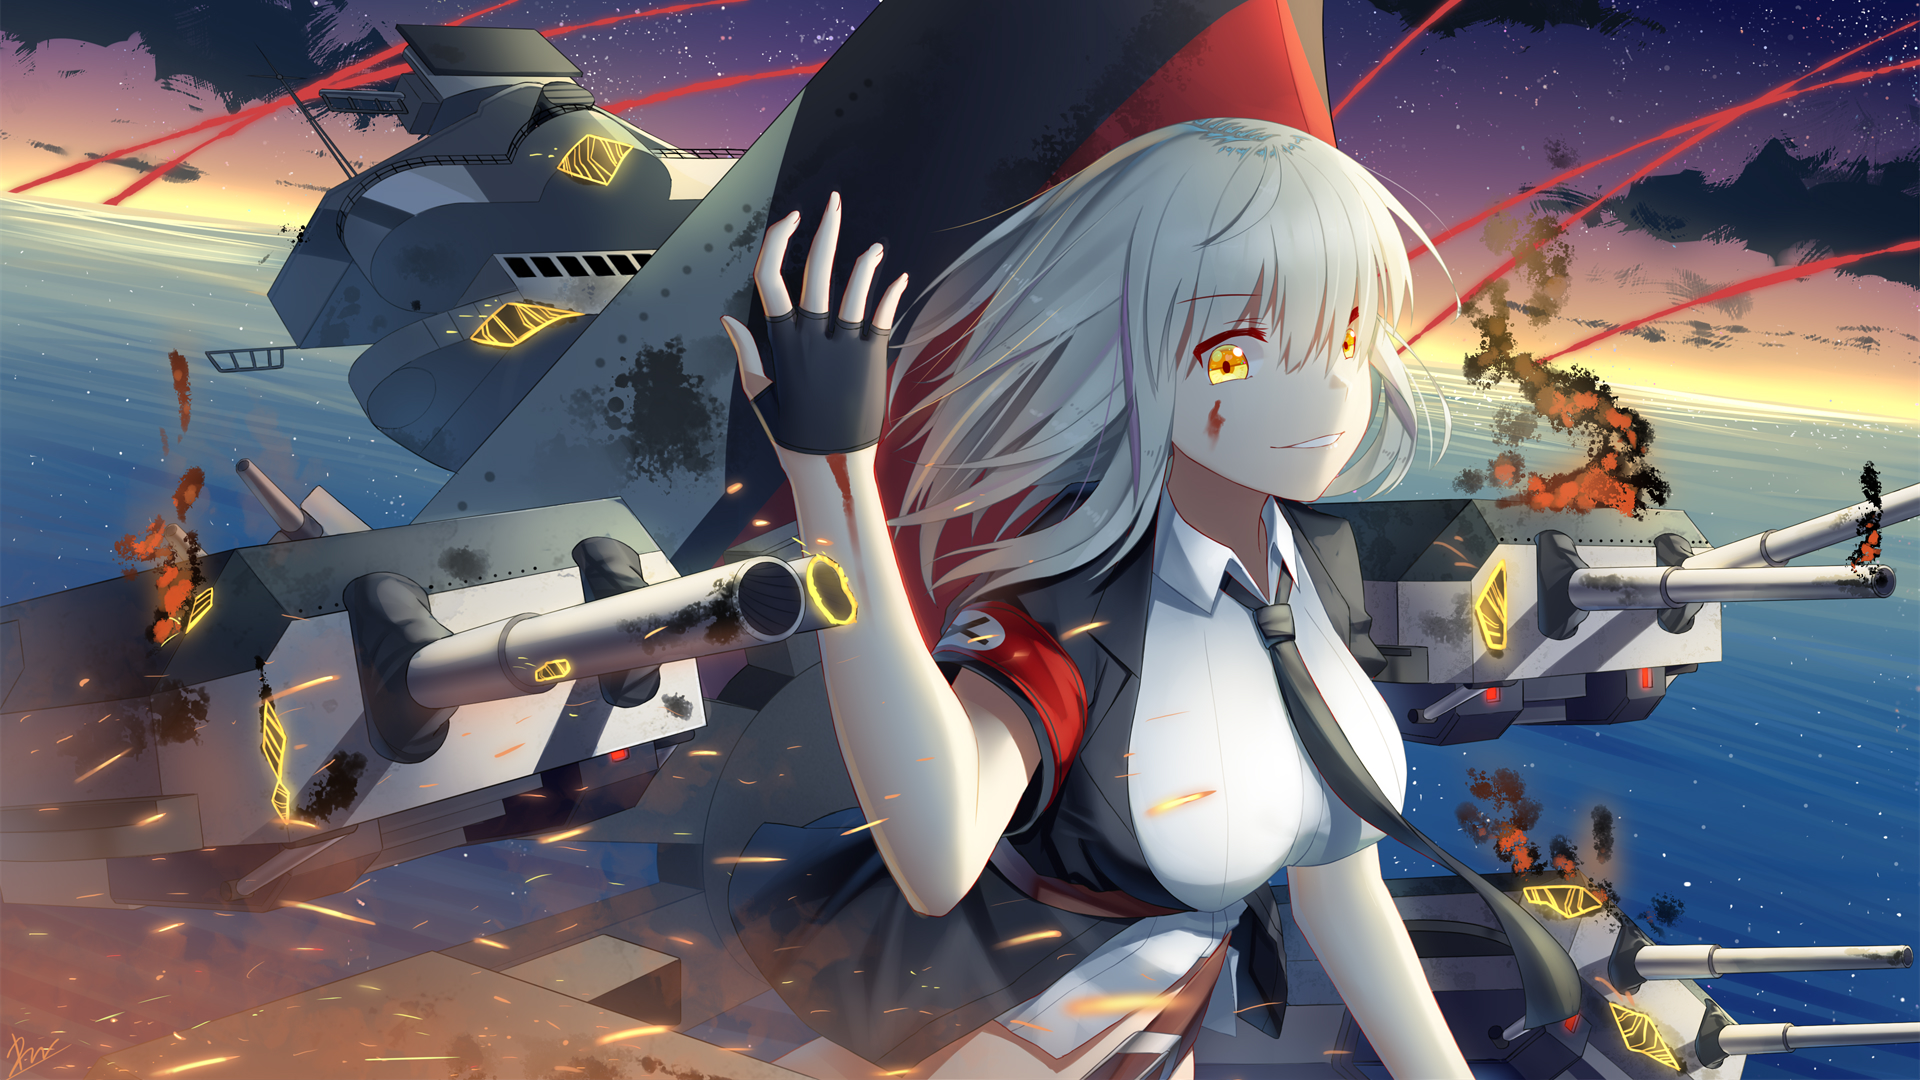 Graf Zeppelin exploding in flames - AI Generated Artwork - NightCafe Creator